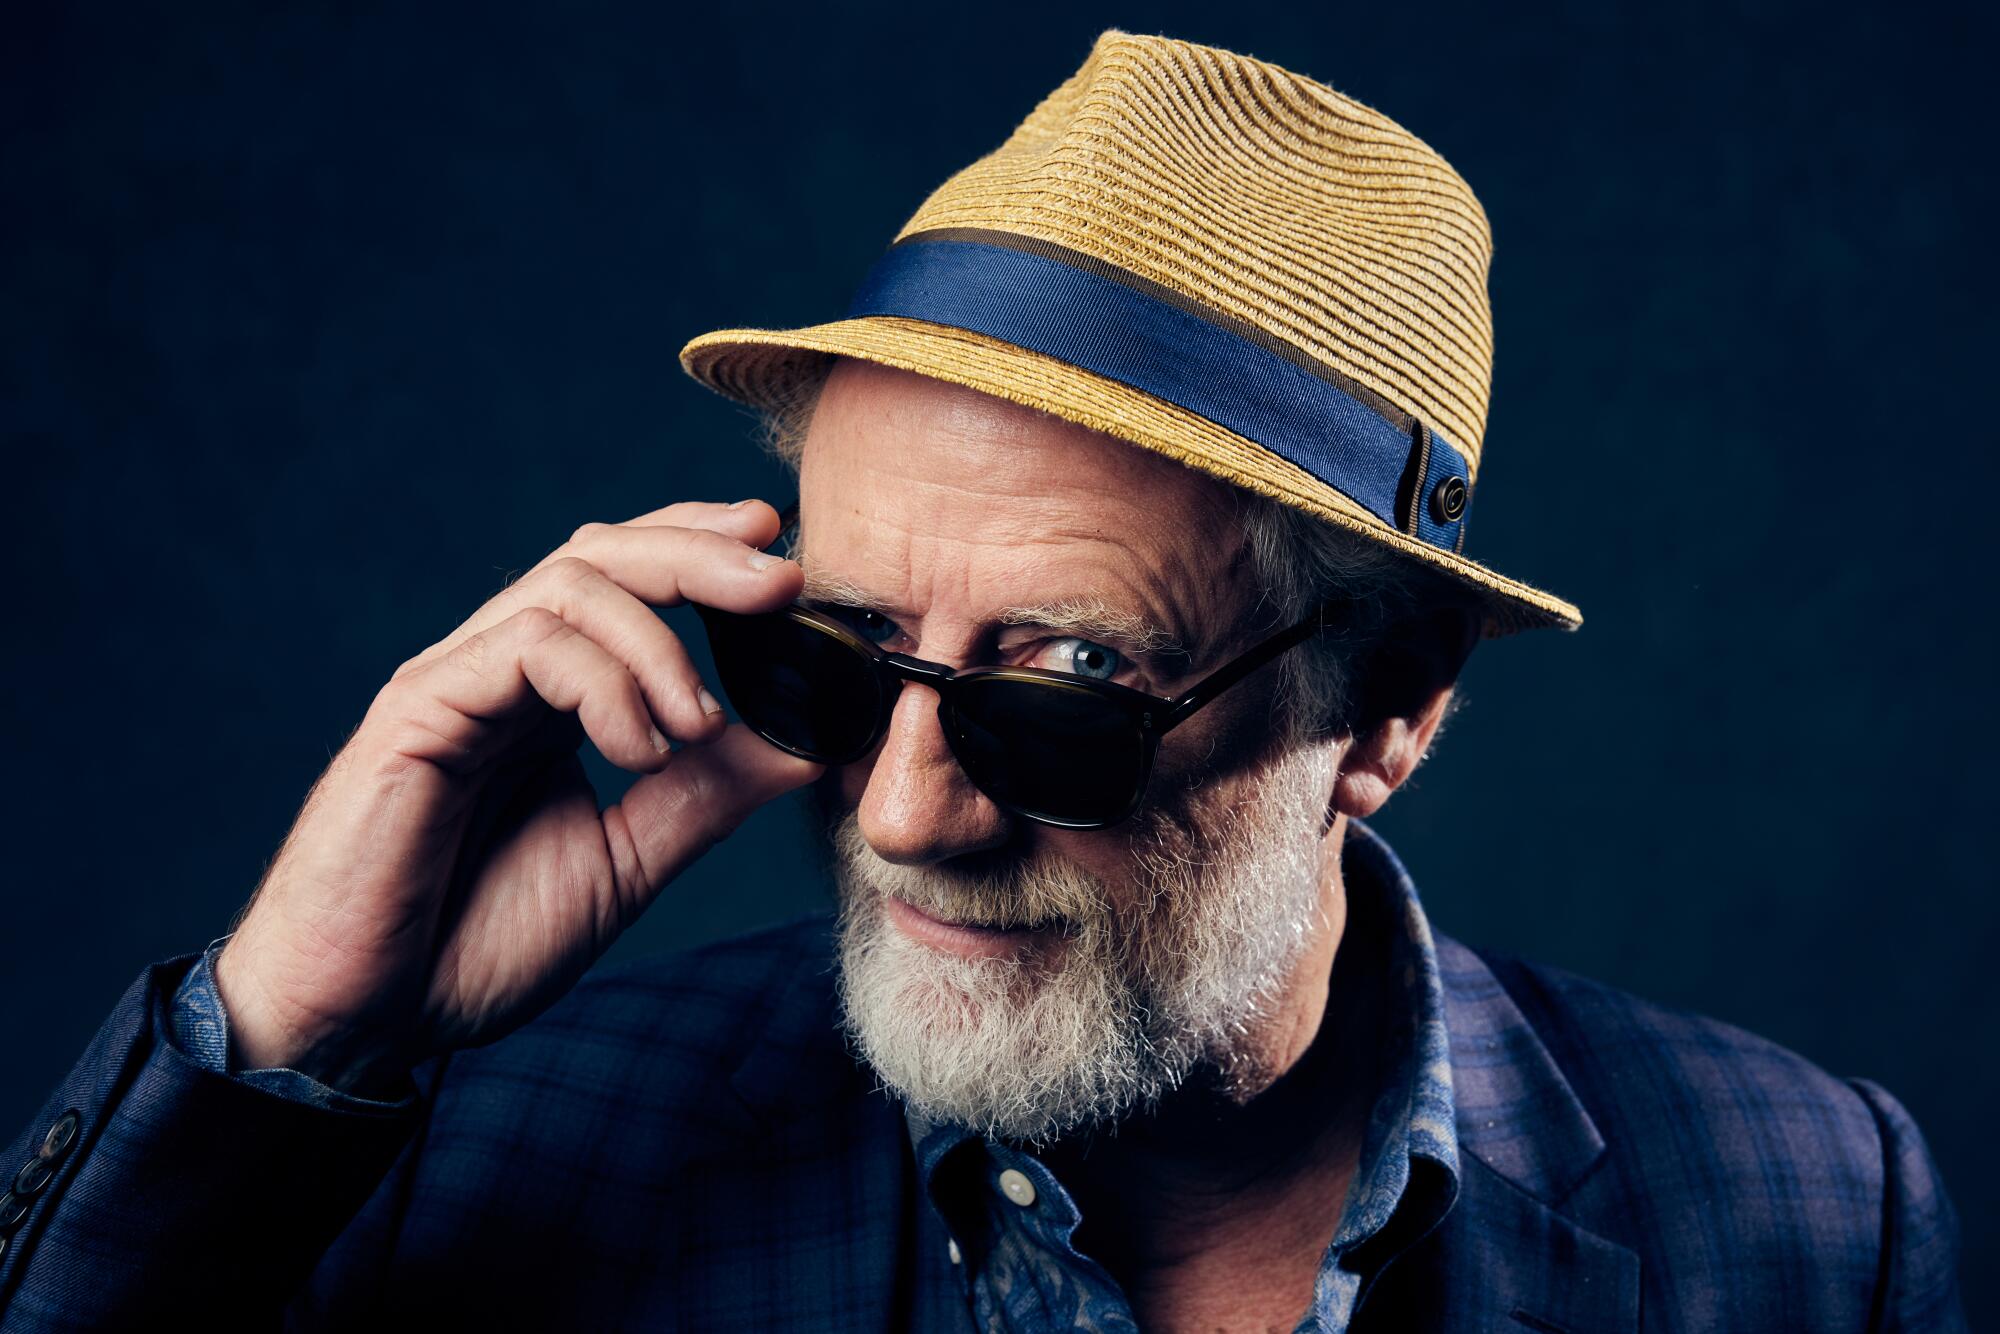 A man in sunglasses and a hat.